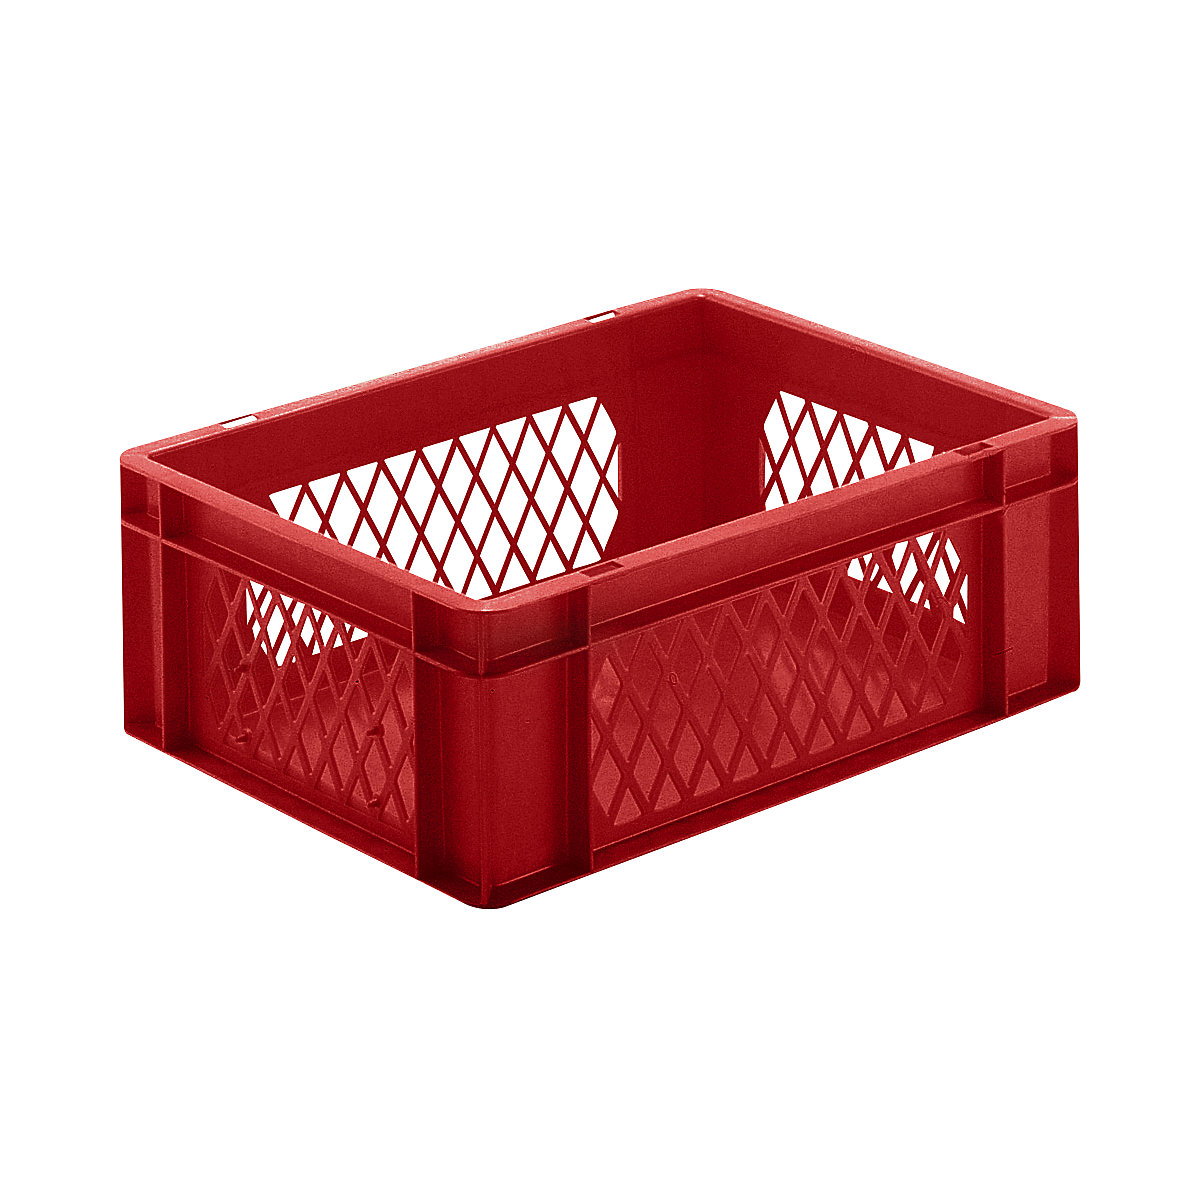 Euro stacking container, perforated walls, closed base